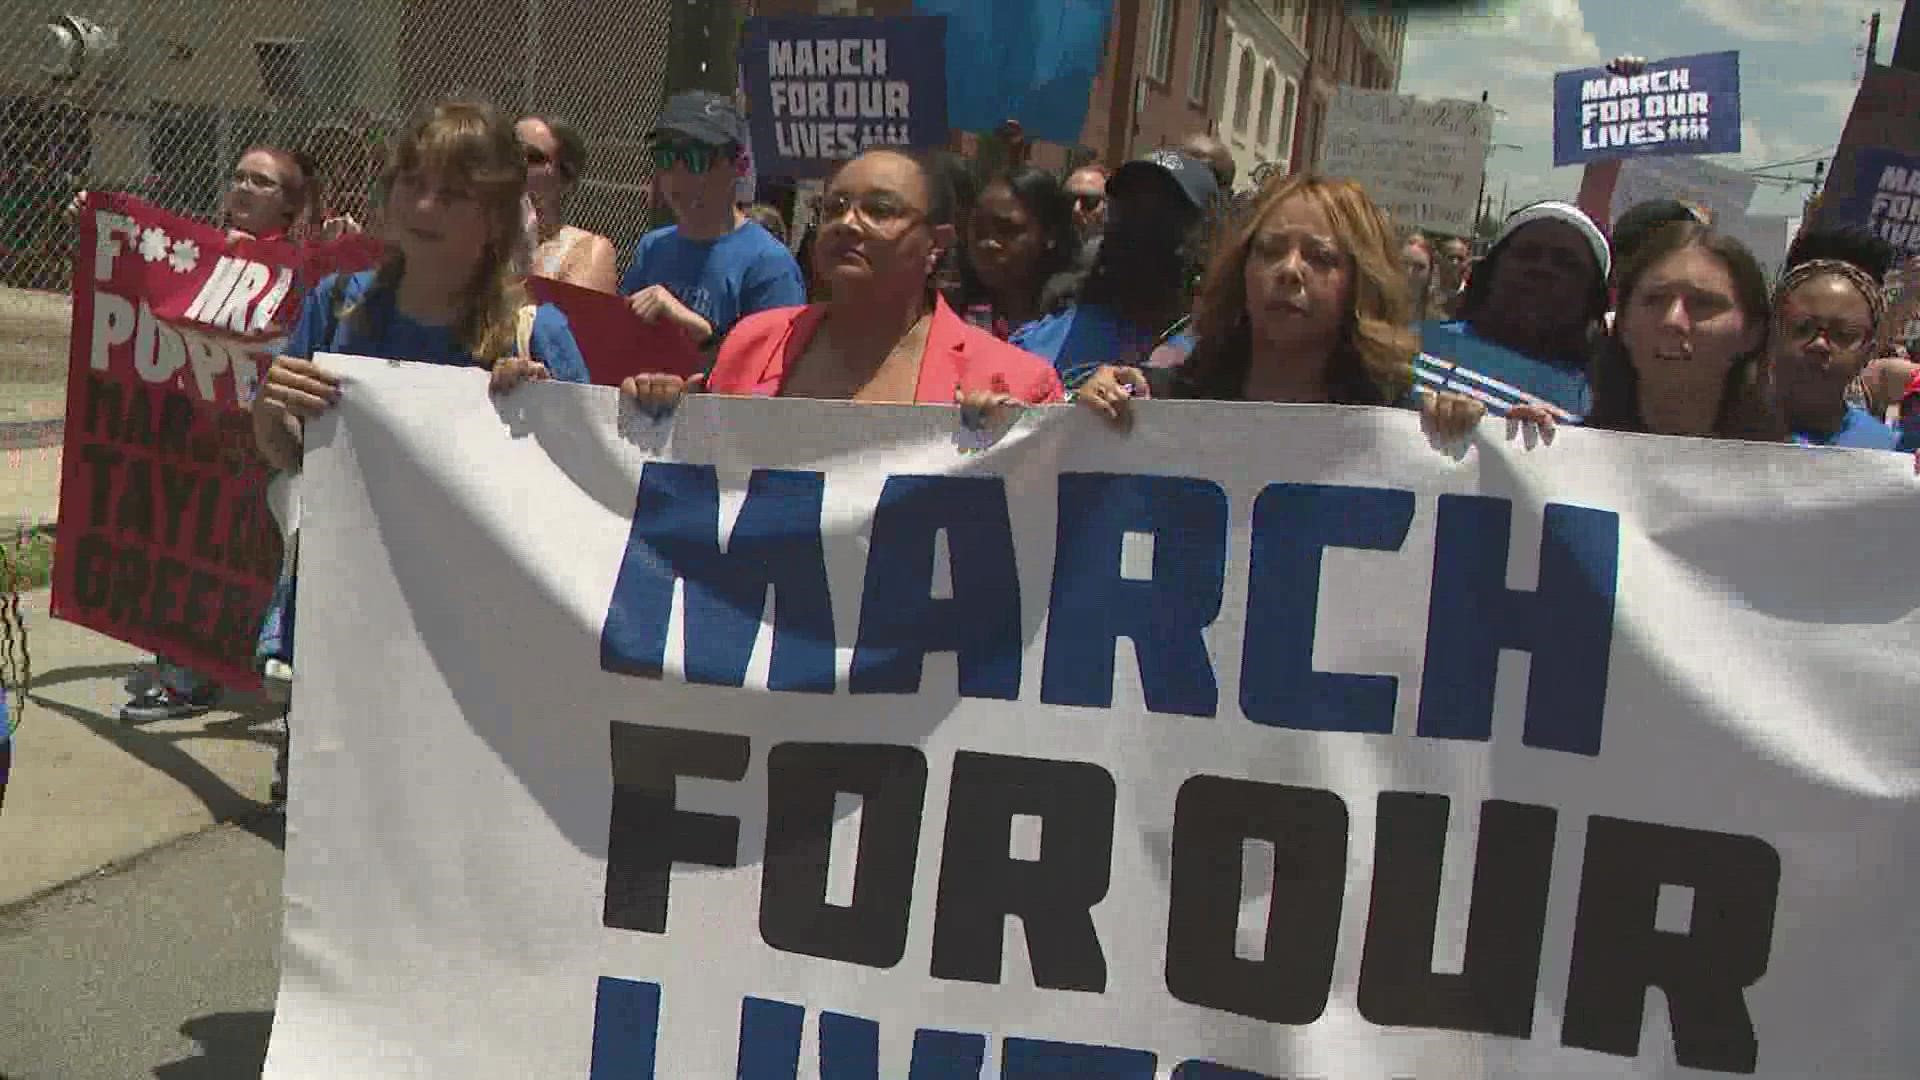 Atlanta's march is one of several happening around the country against gun violence on Saturday.